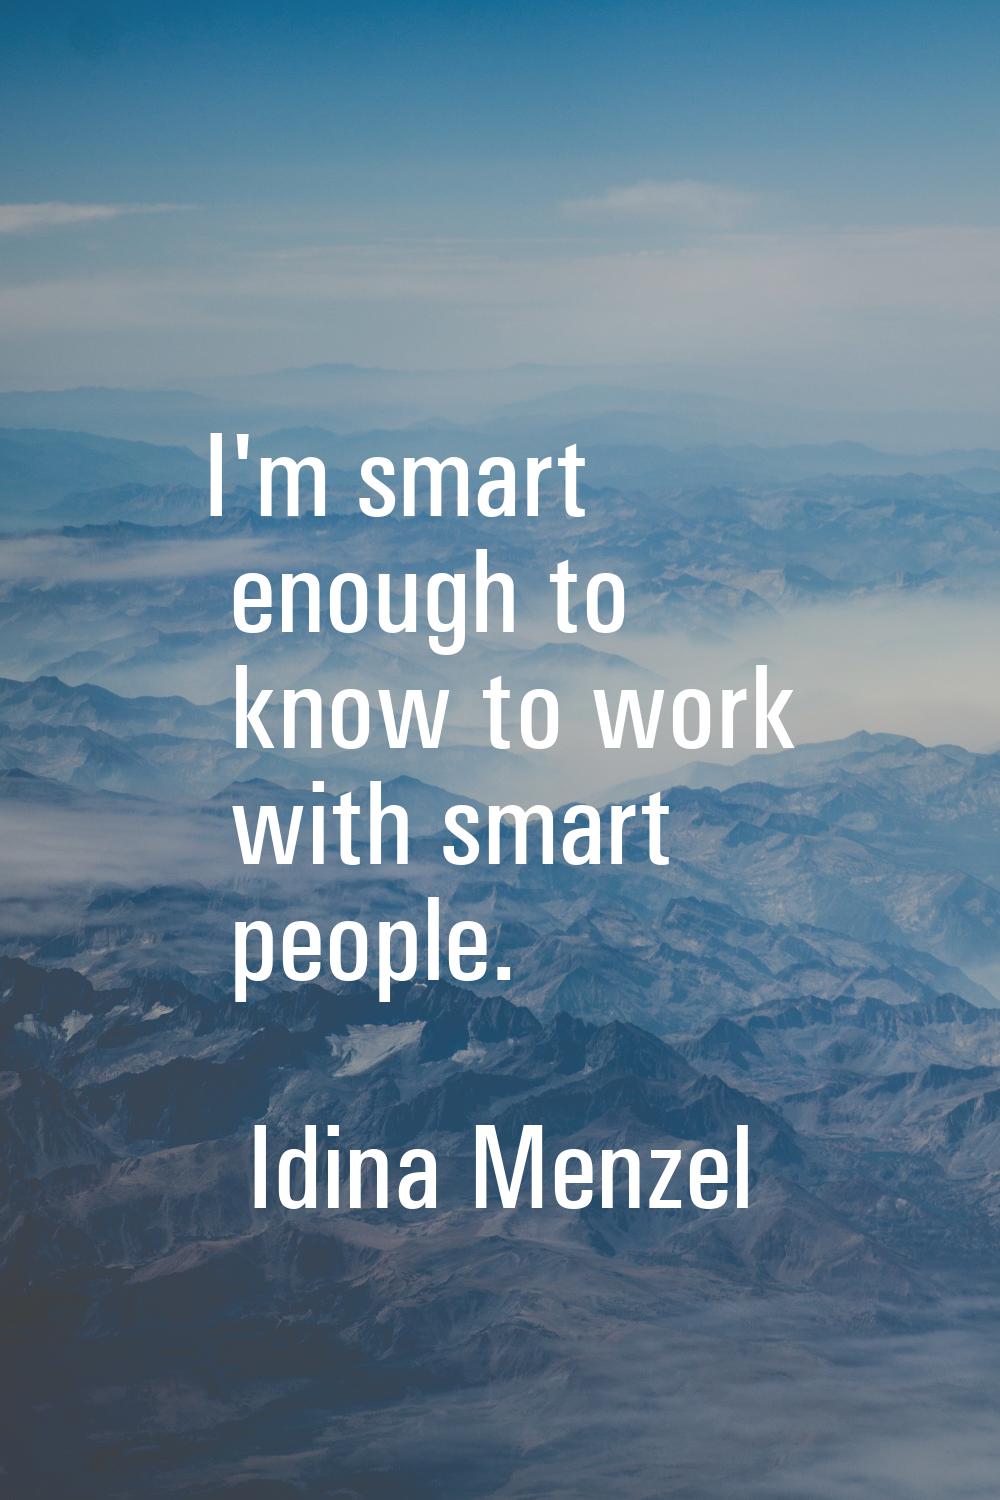 I'm smart enough to know to work with smart people.